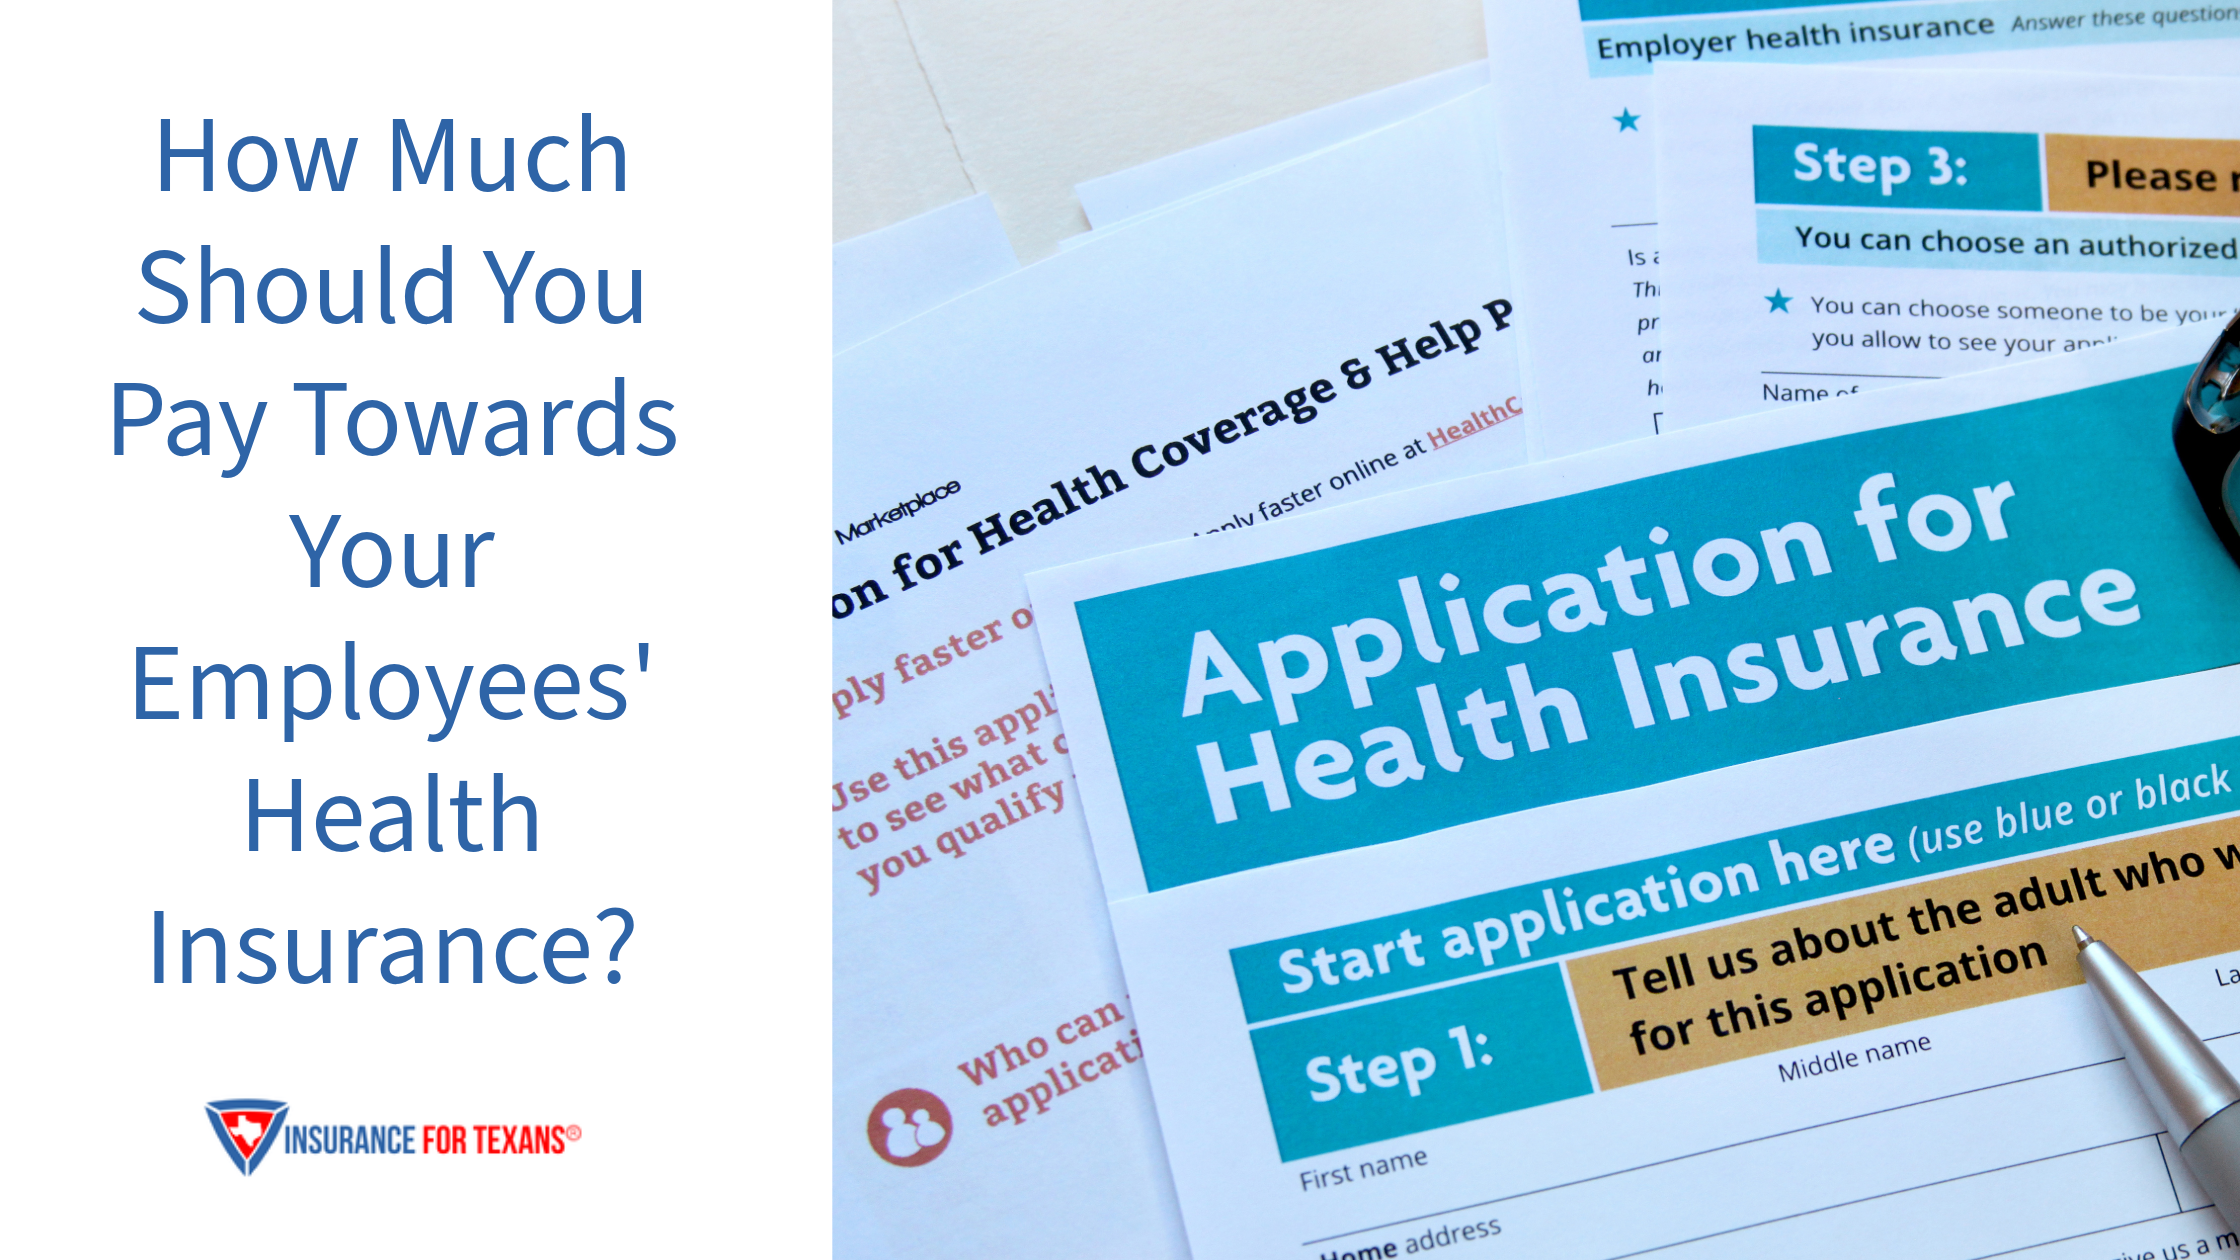 How Much Should You Pay Towards Your Employees' Health Insurance?